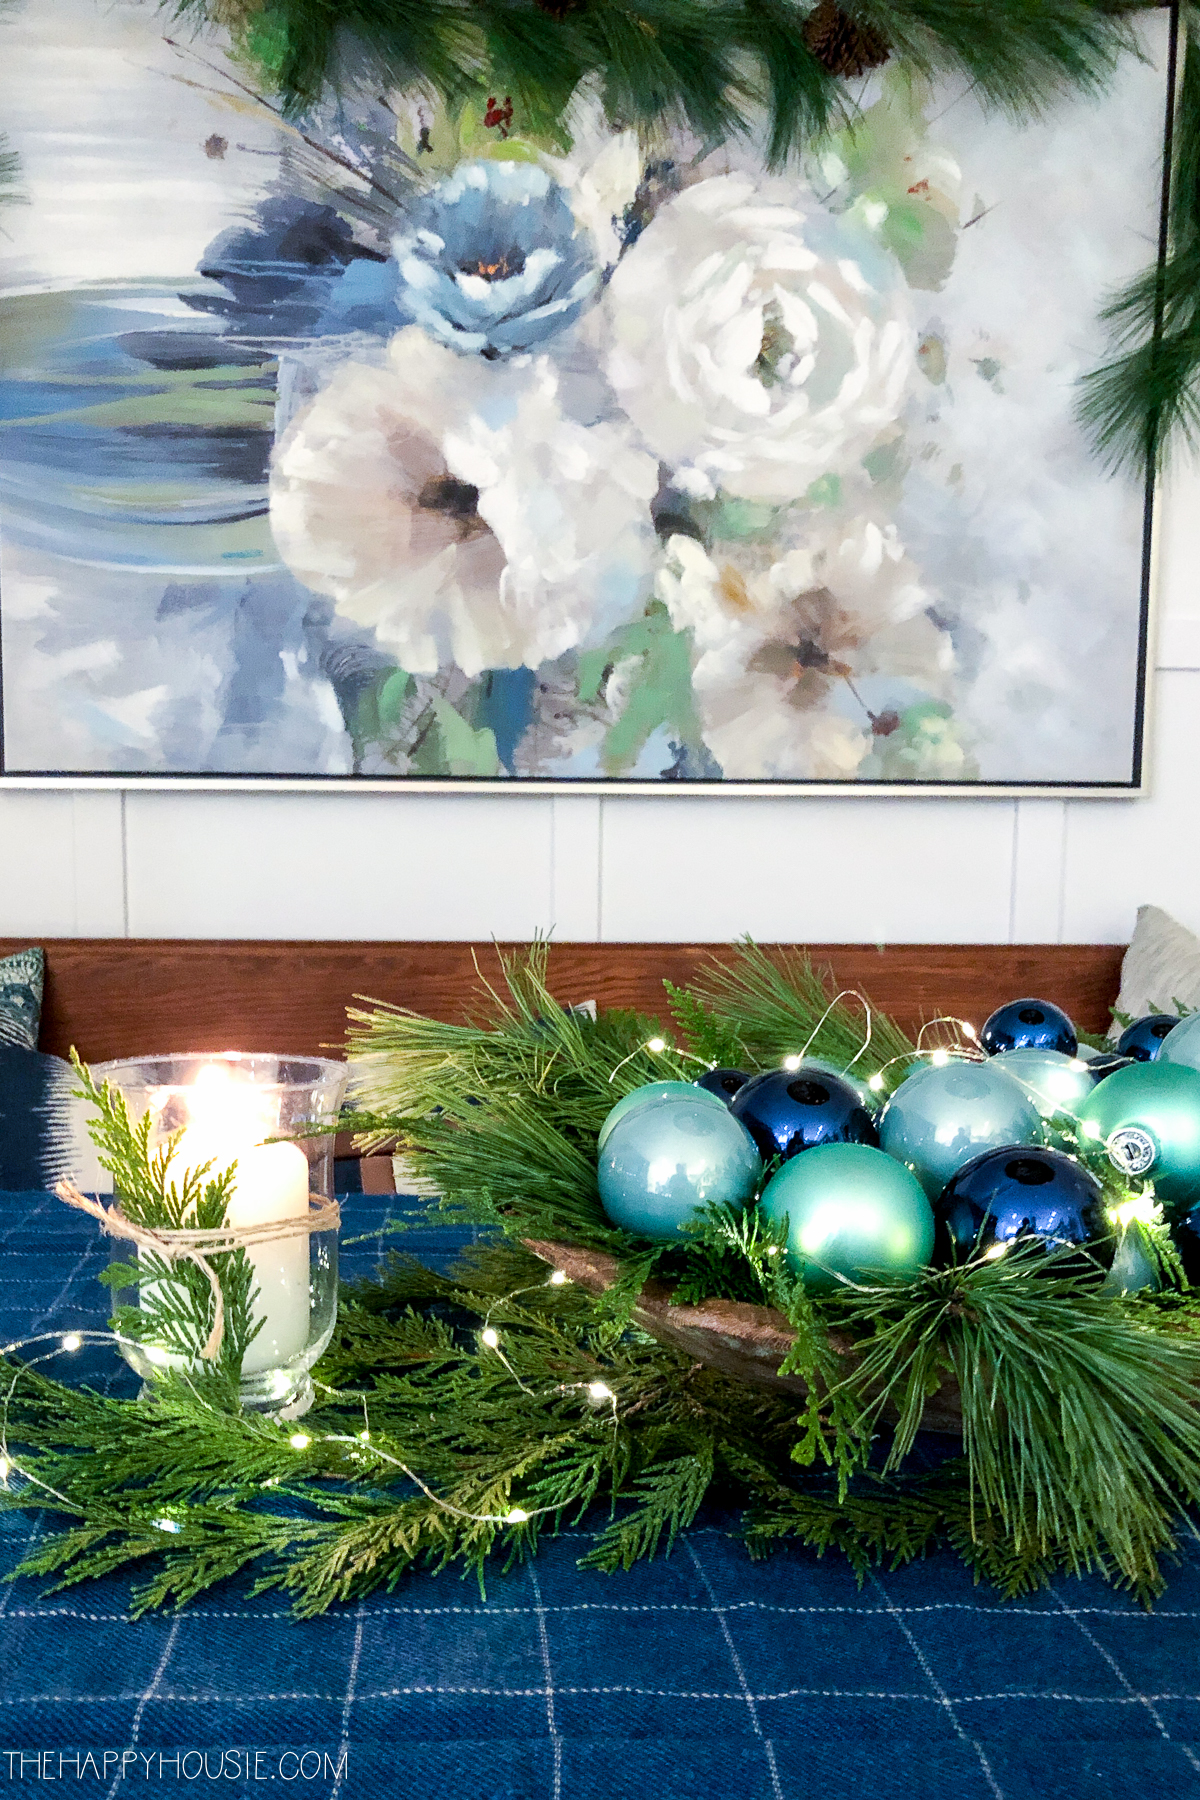 There is a large floral picture behind the table set for Christmas.